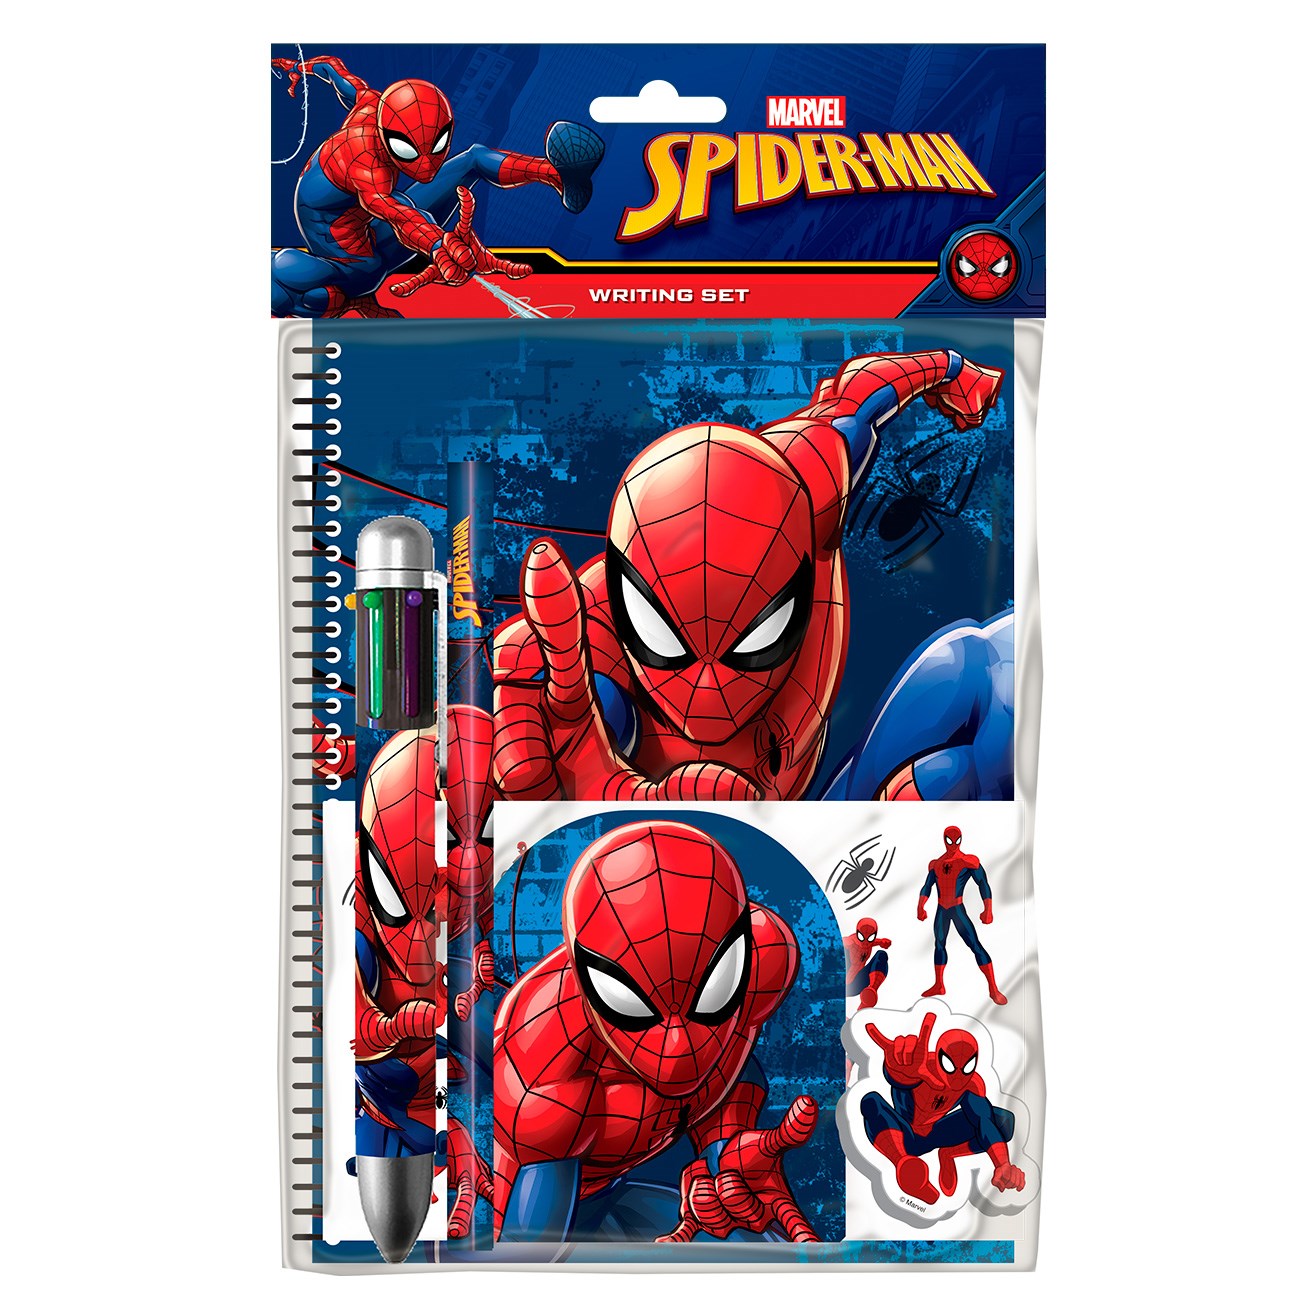 Euromic Spiderman Writing Set with Multi Colored Ballpoint Pen